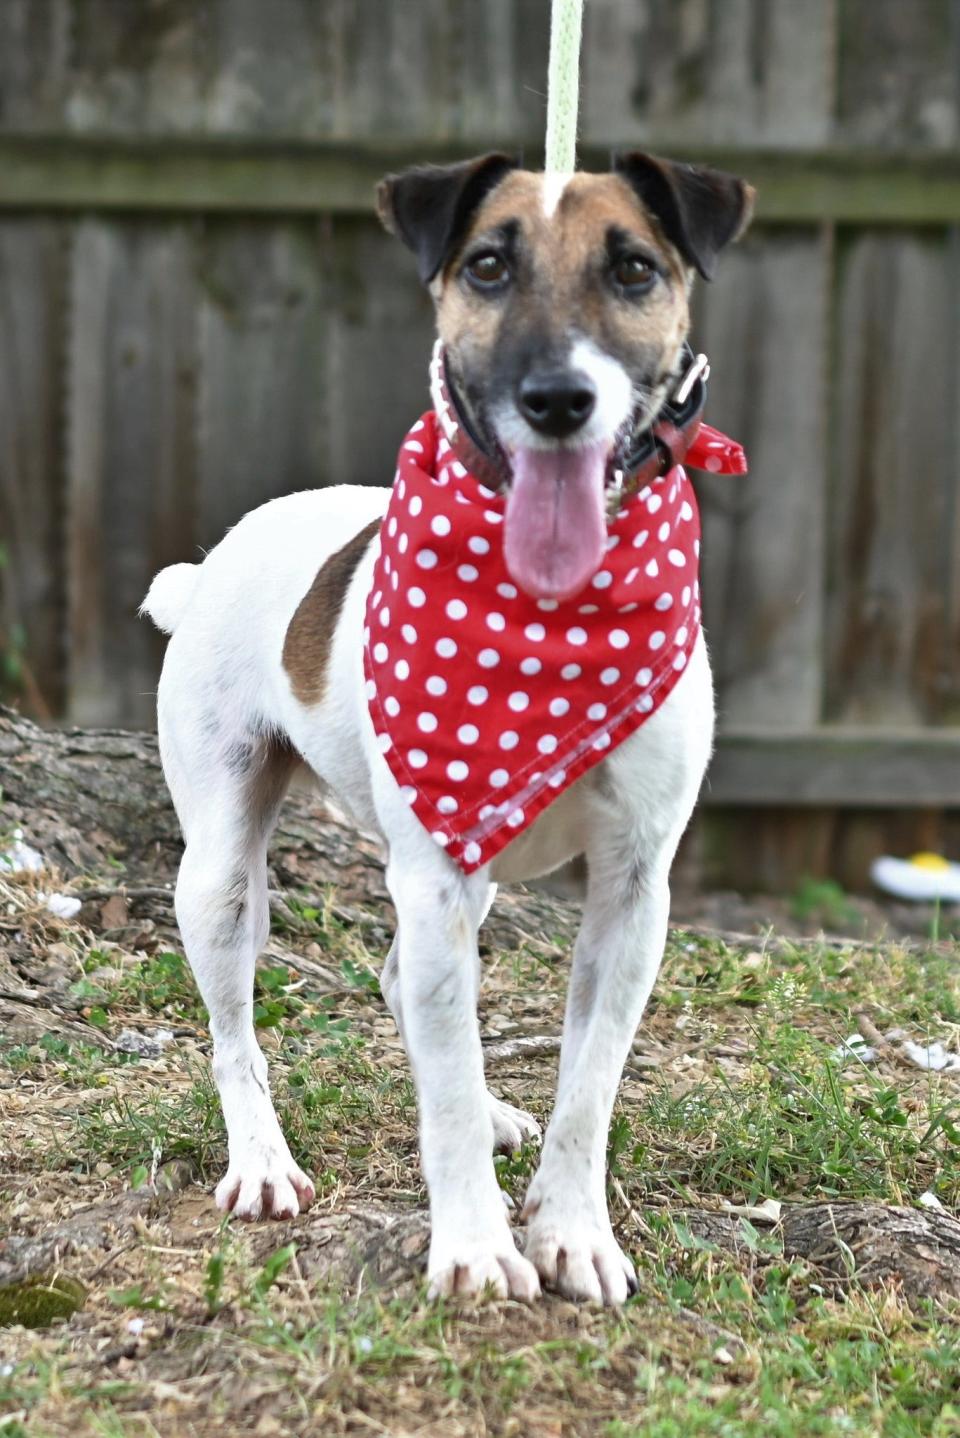 Jack, 5 years old, is a Jack Russell Terrier available for adoption at the Kentucky Humane Society